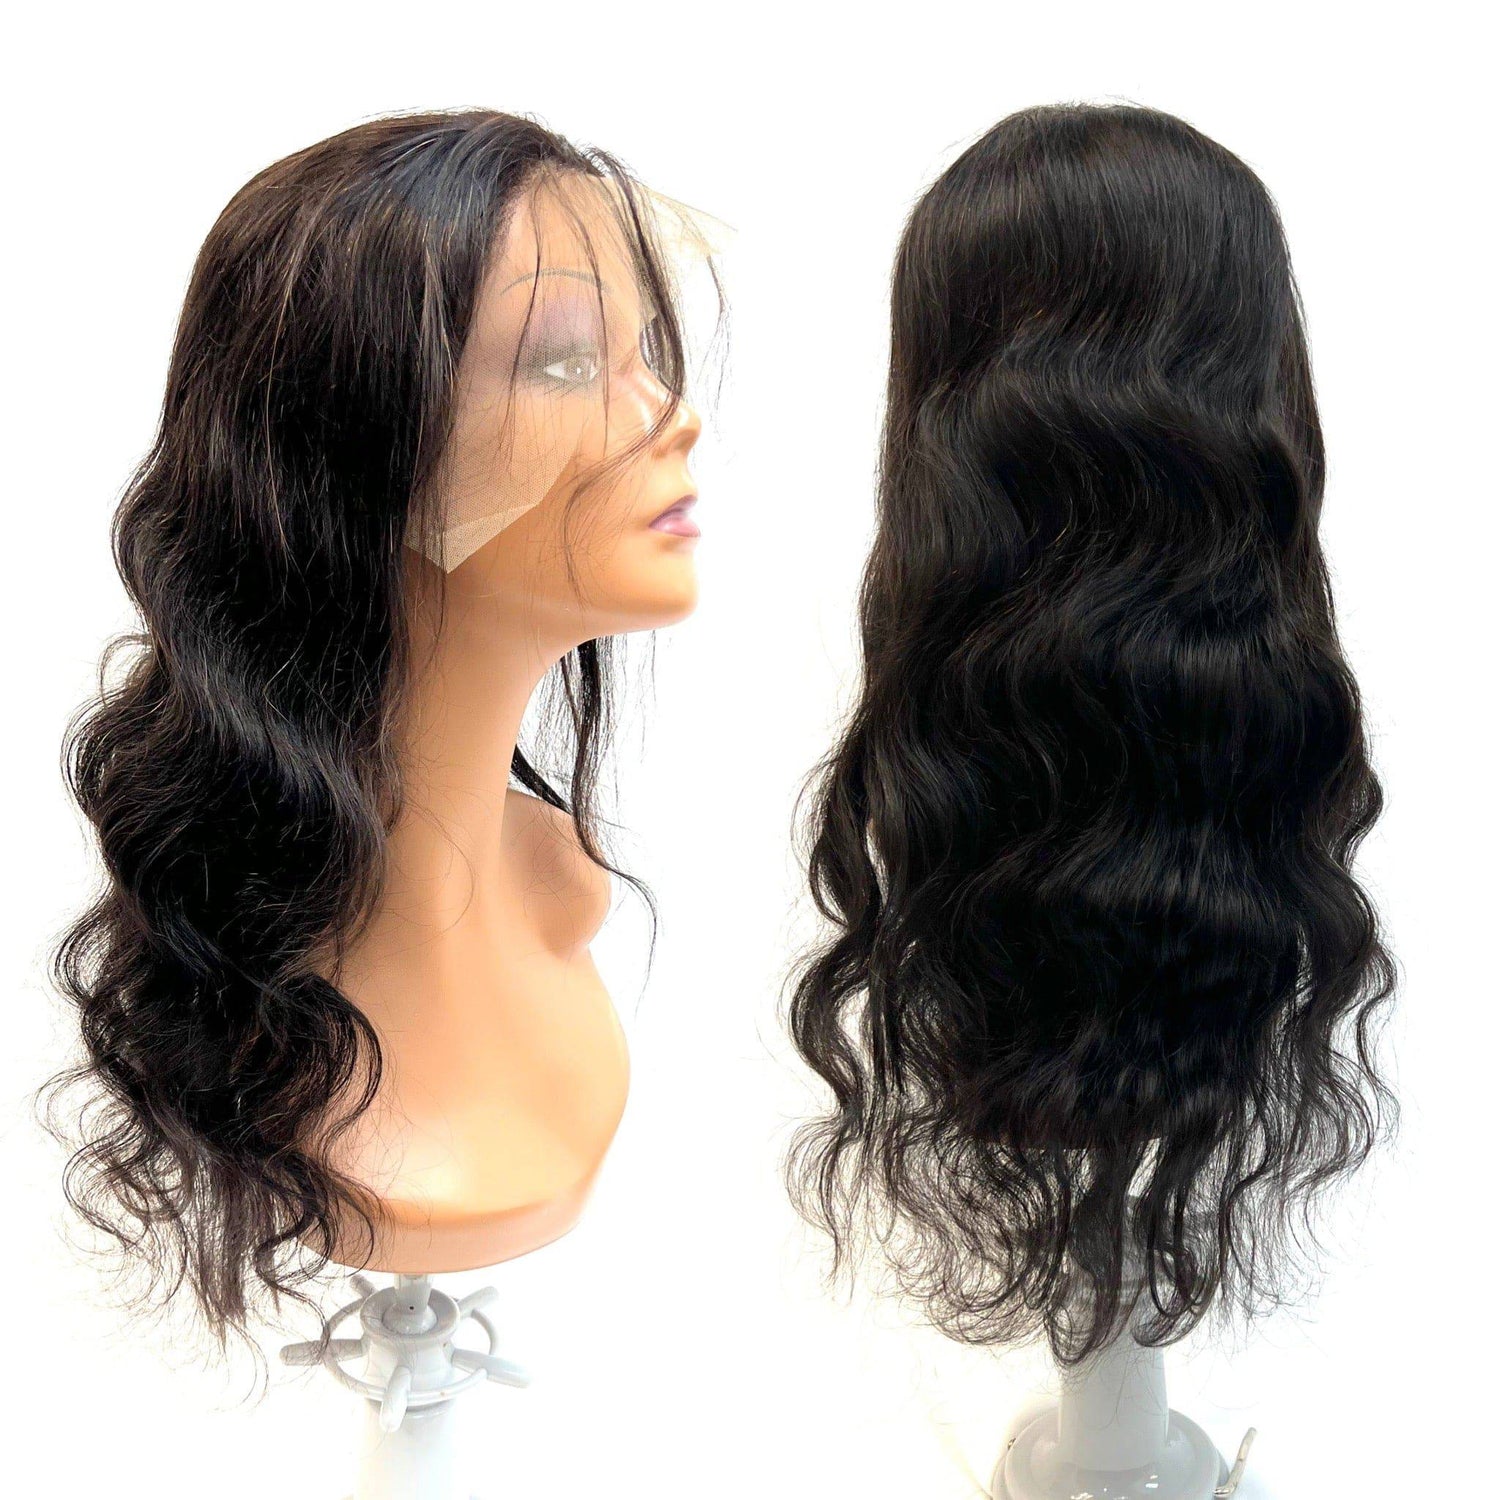 RIO Body Wave Human Hair Front Lace Wig - Natural Black - VIP Extensions